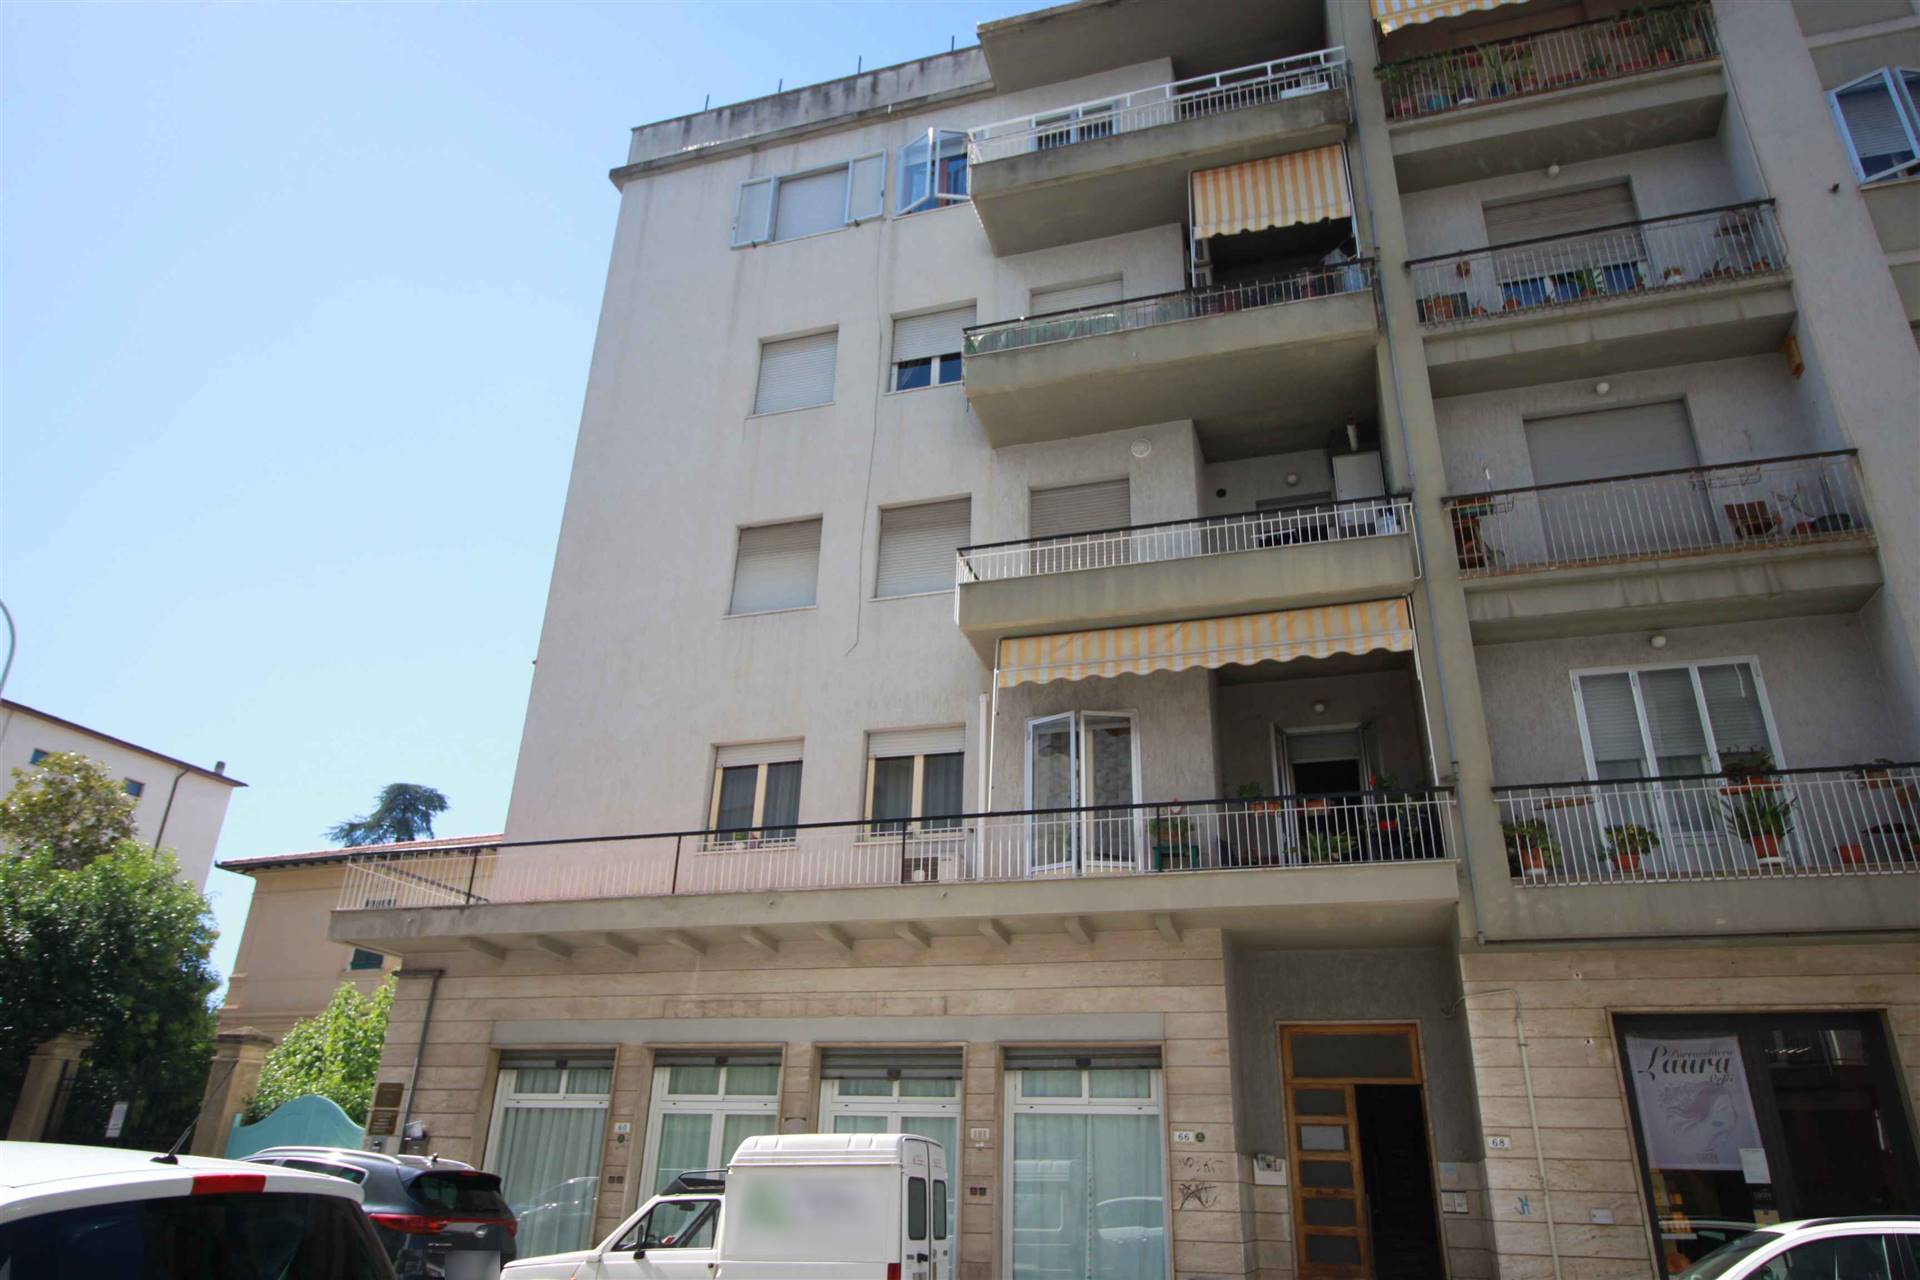 CENTRO CITTÀ, GROSSETO, Apartment for sale of 135 Sq. mt., Excellent Condition, Heating Individual heating system, Energetic class: E, placed at 1° on 4, composed by: 7 Rooms, , 4 Bedrooms, 2 